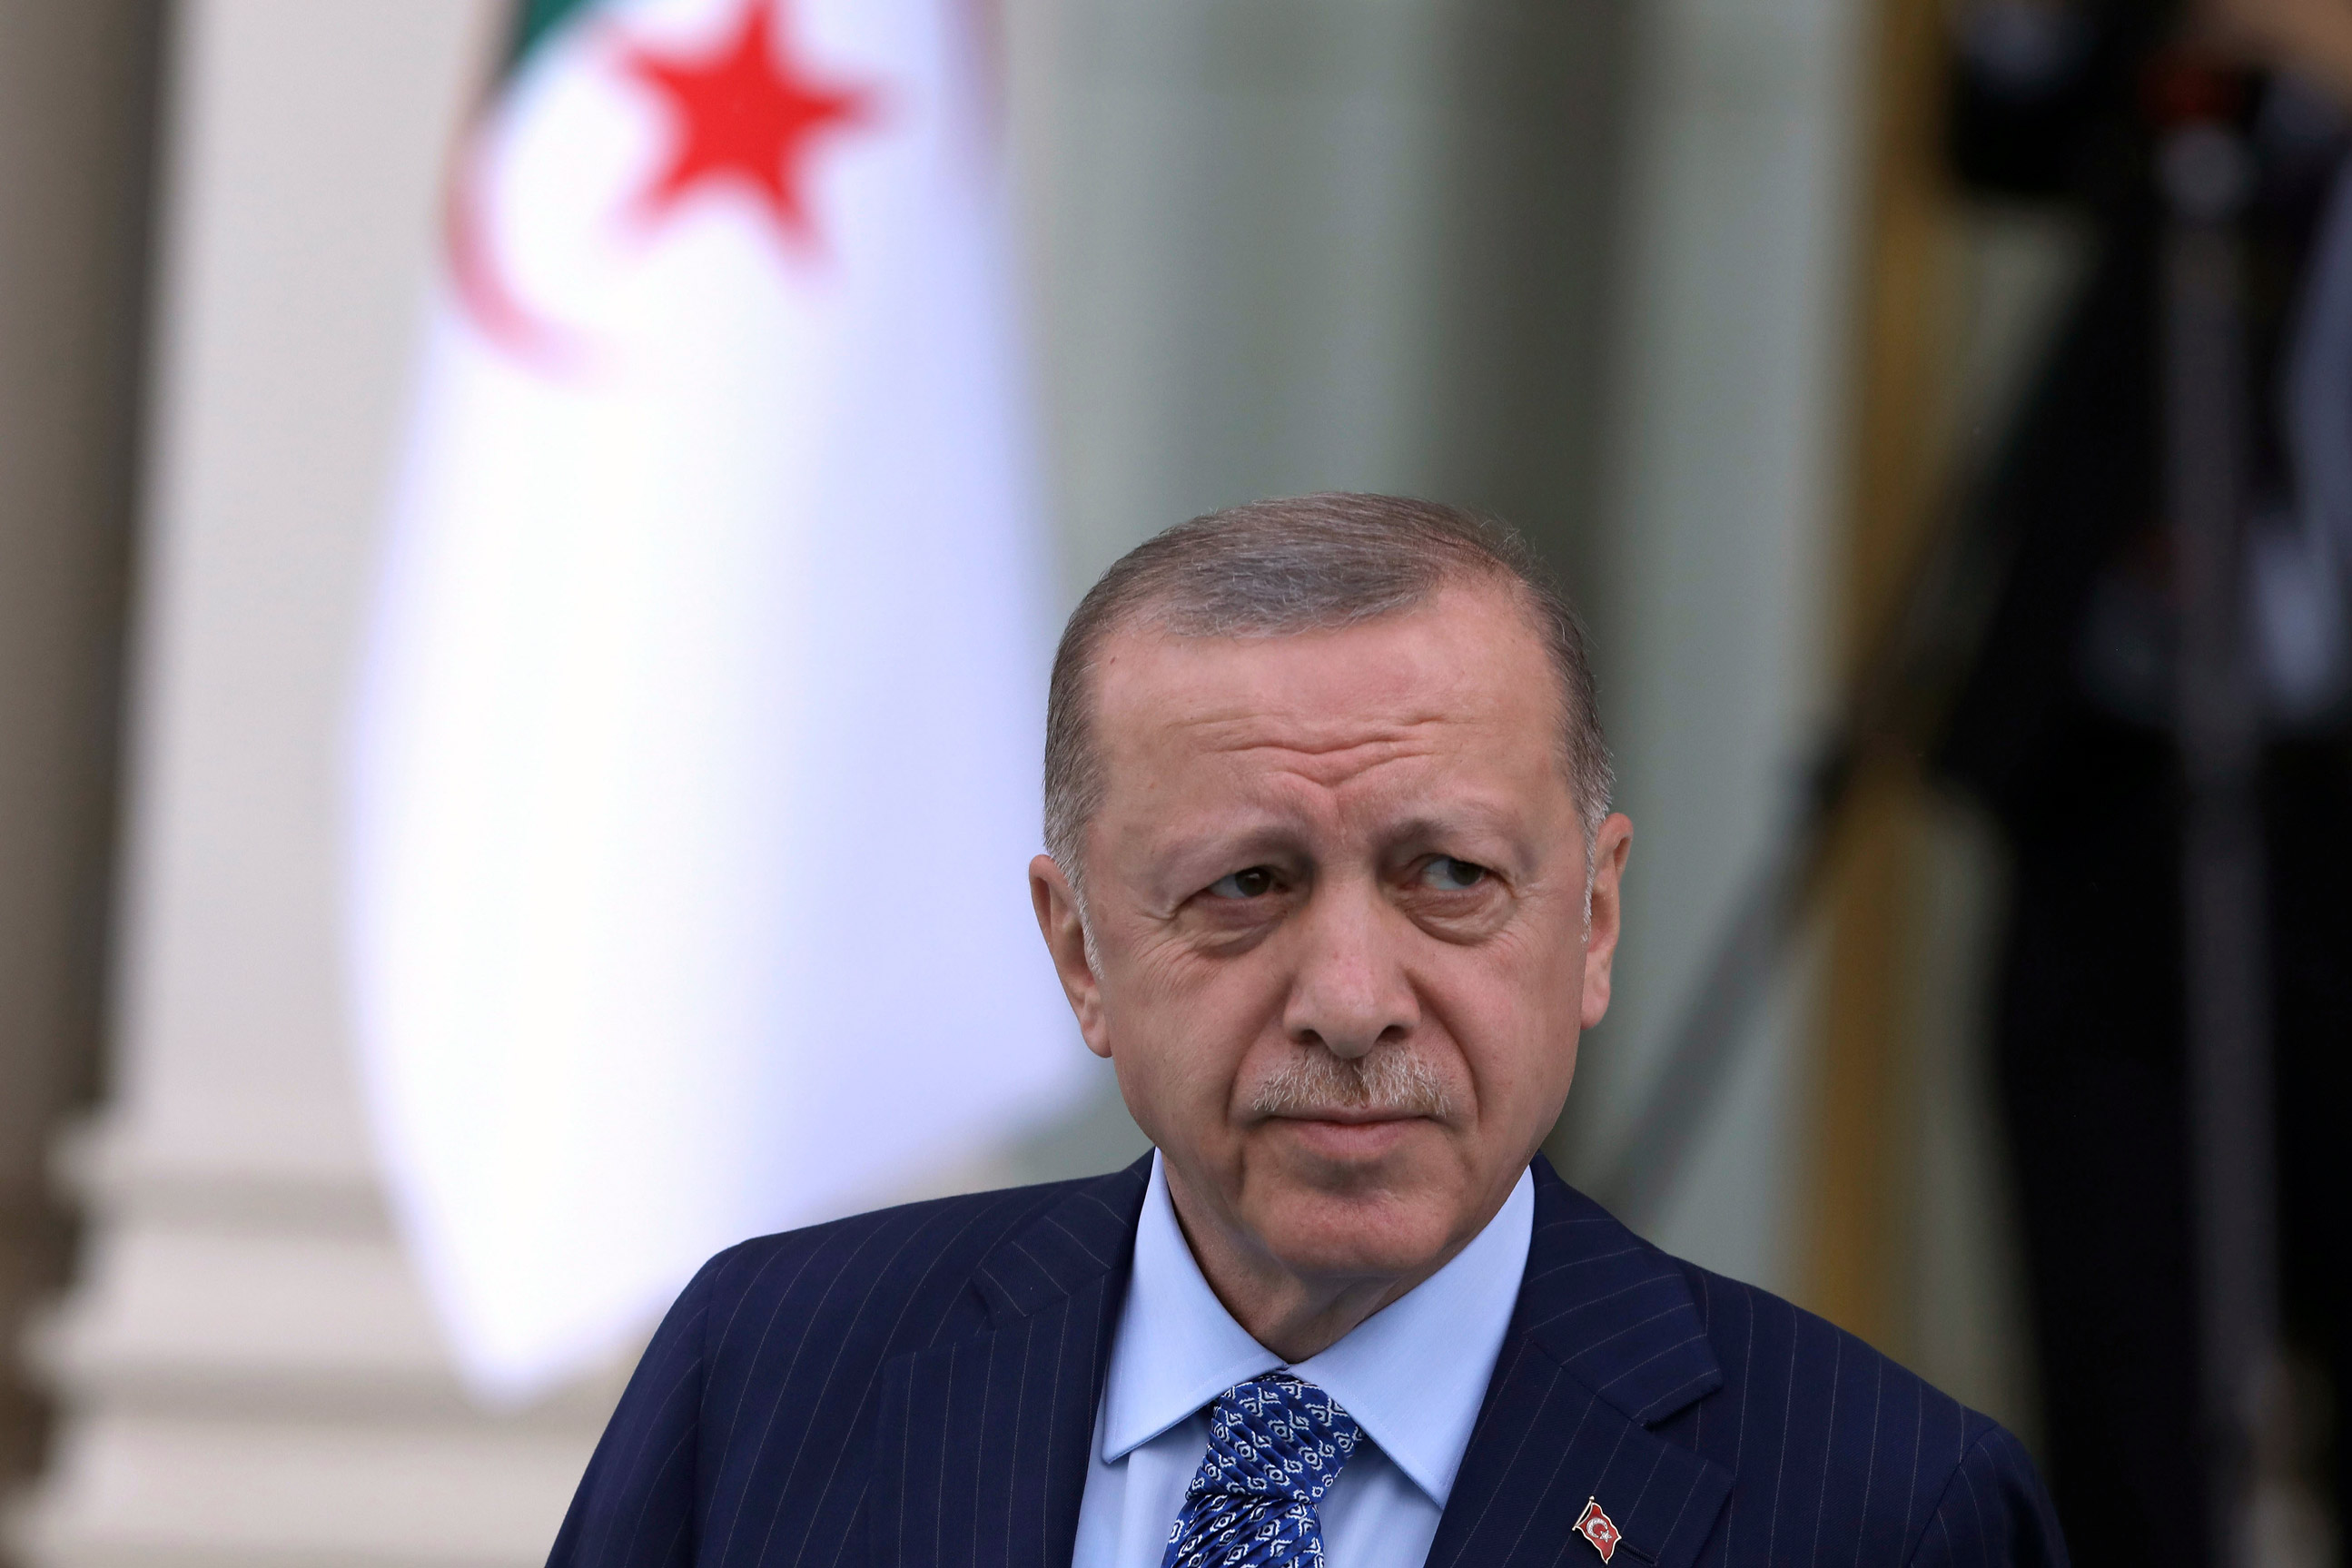 Turkish President Recep Tayyip Erdogan arrives for a welcoming ceremony for his Algerian counterpart, Abdelmadjid Tebboune, in Ankara, Turkey on May 16.